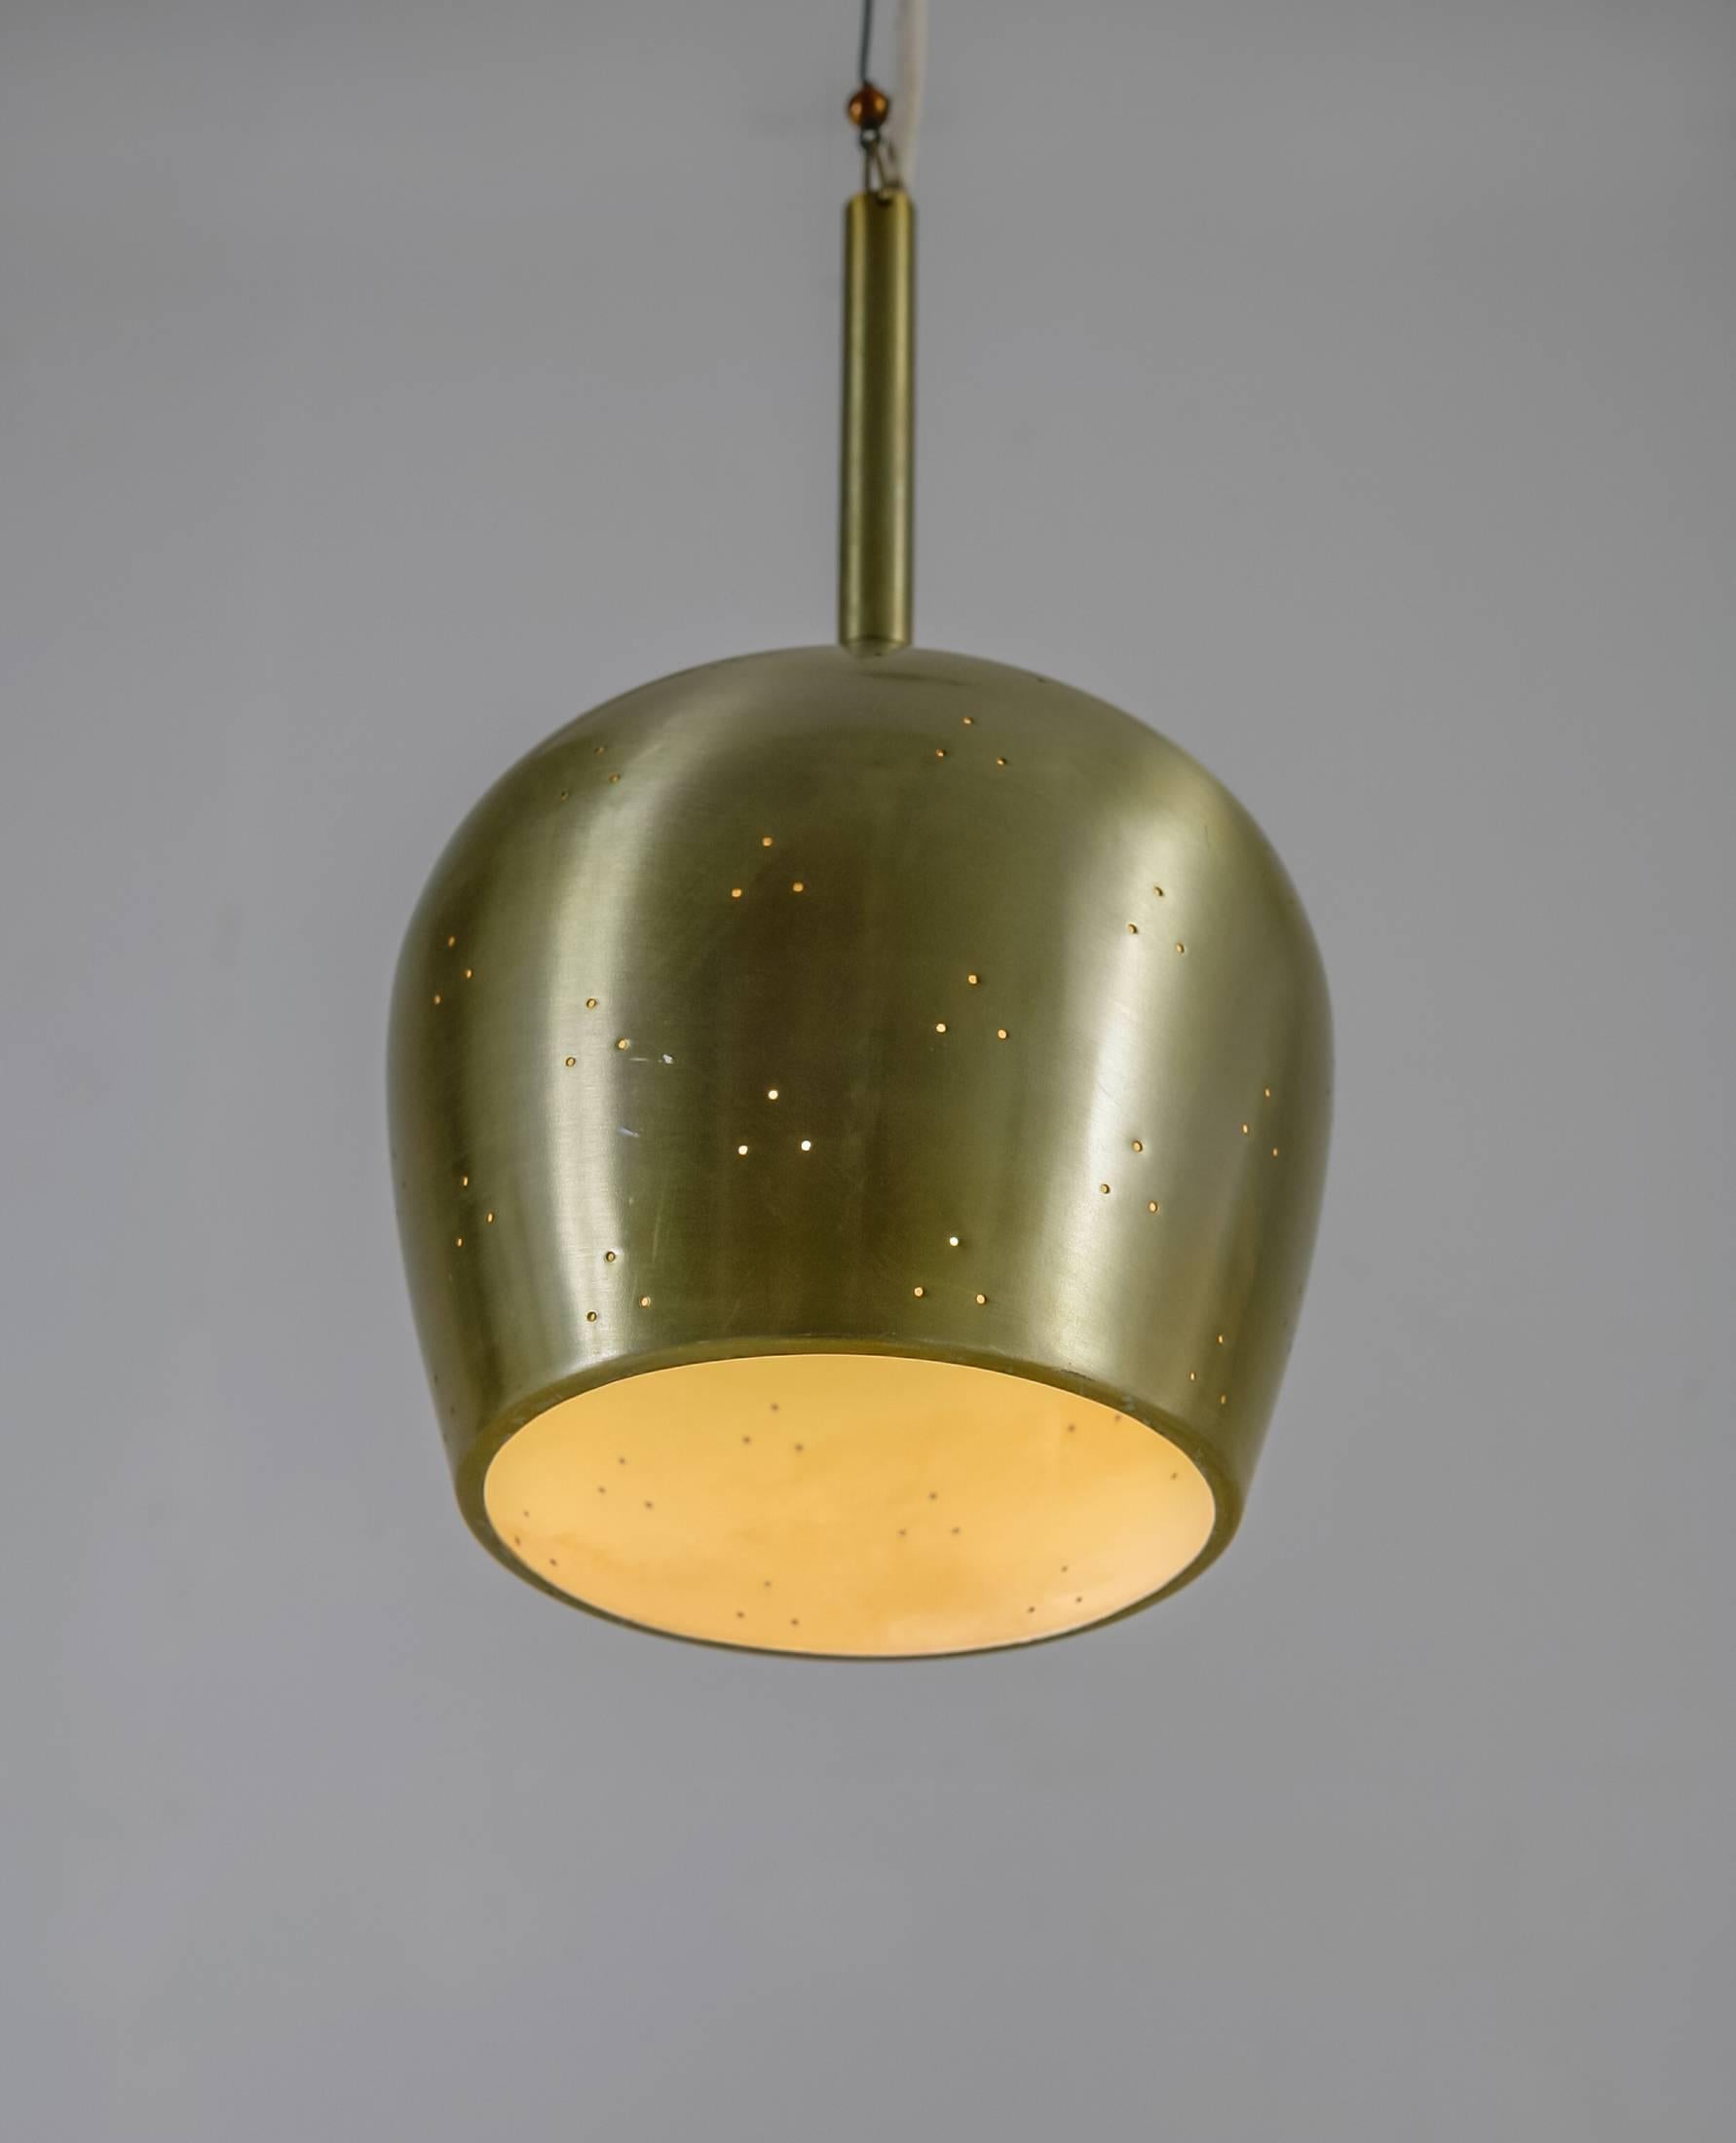 American Pair Paavo Tynell Brass Brandy Snifter Shaped Pendant Lamps, Finland, 1950s For Sale